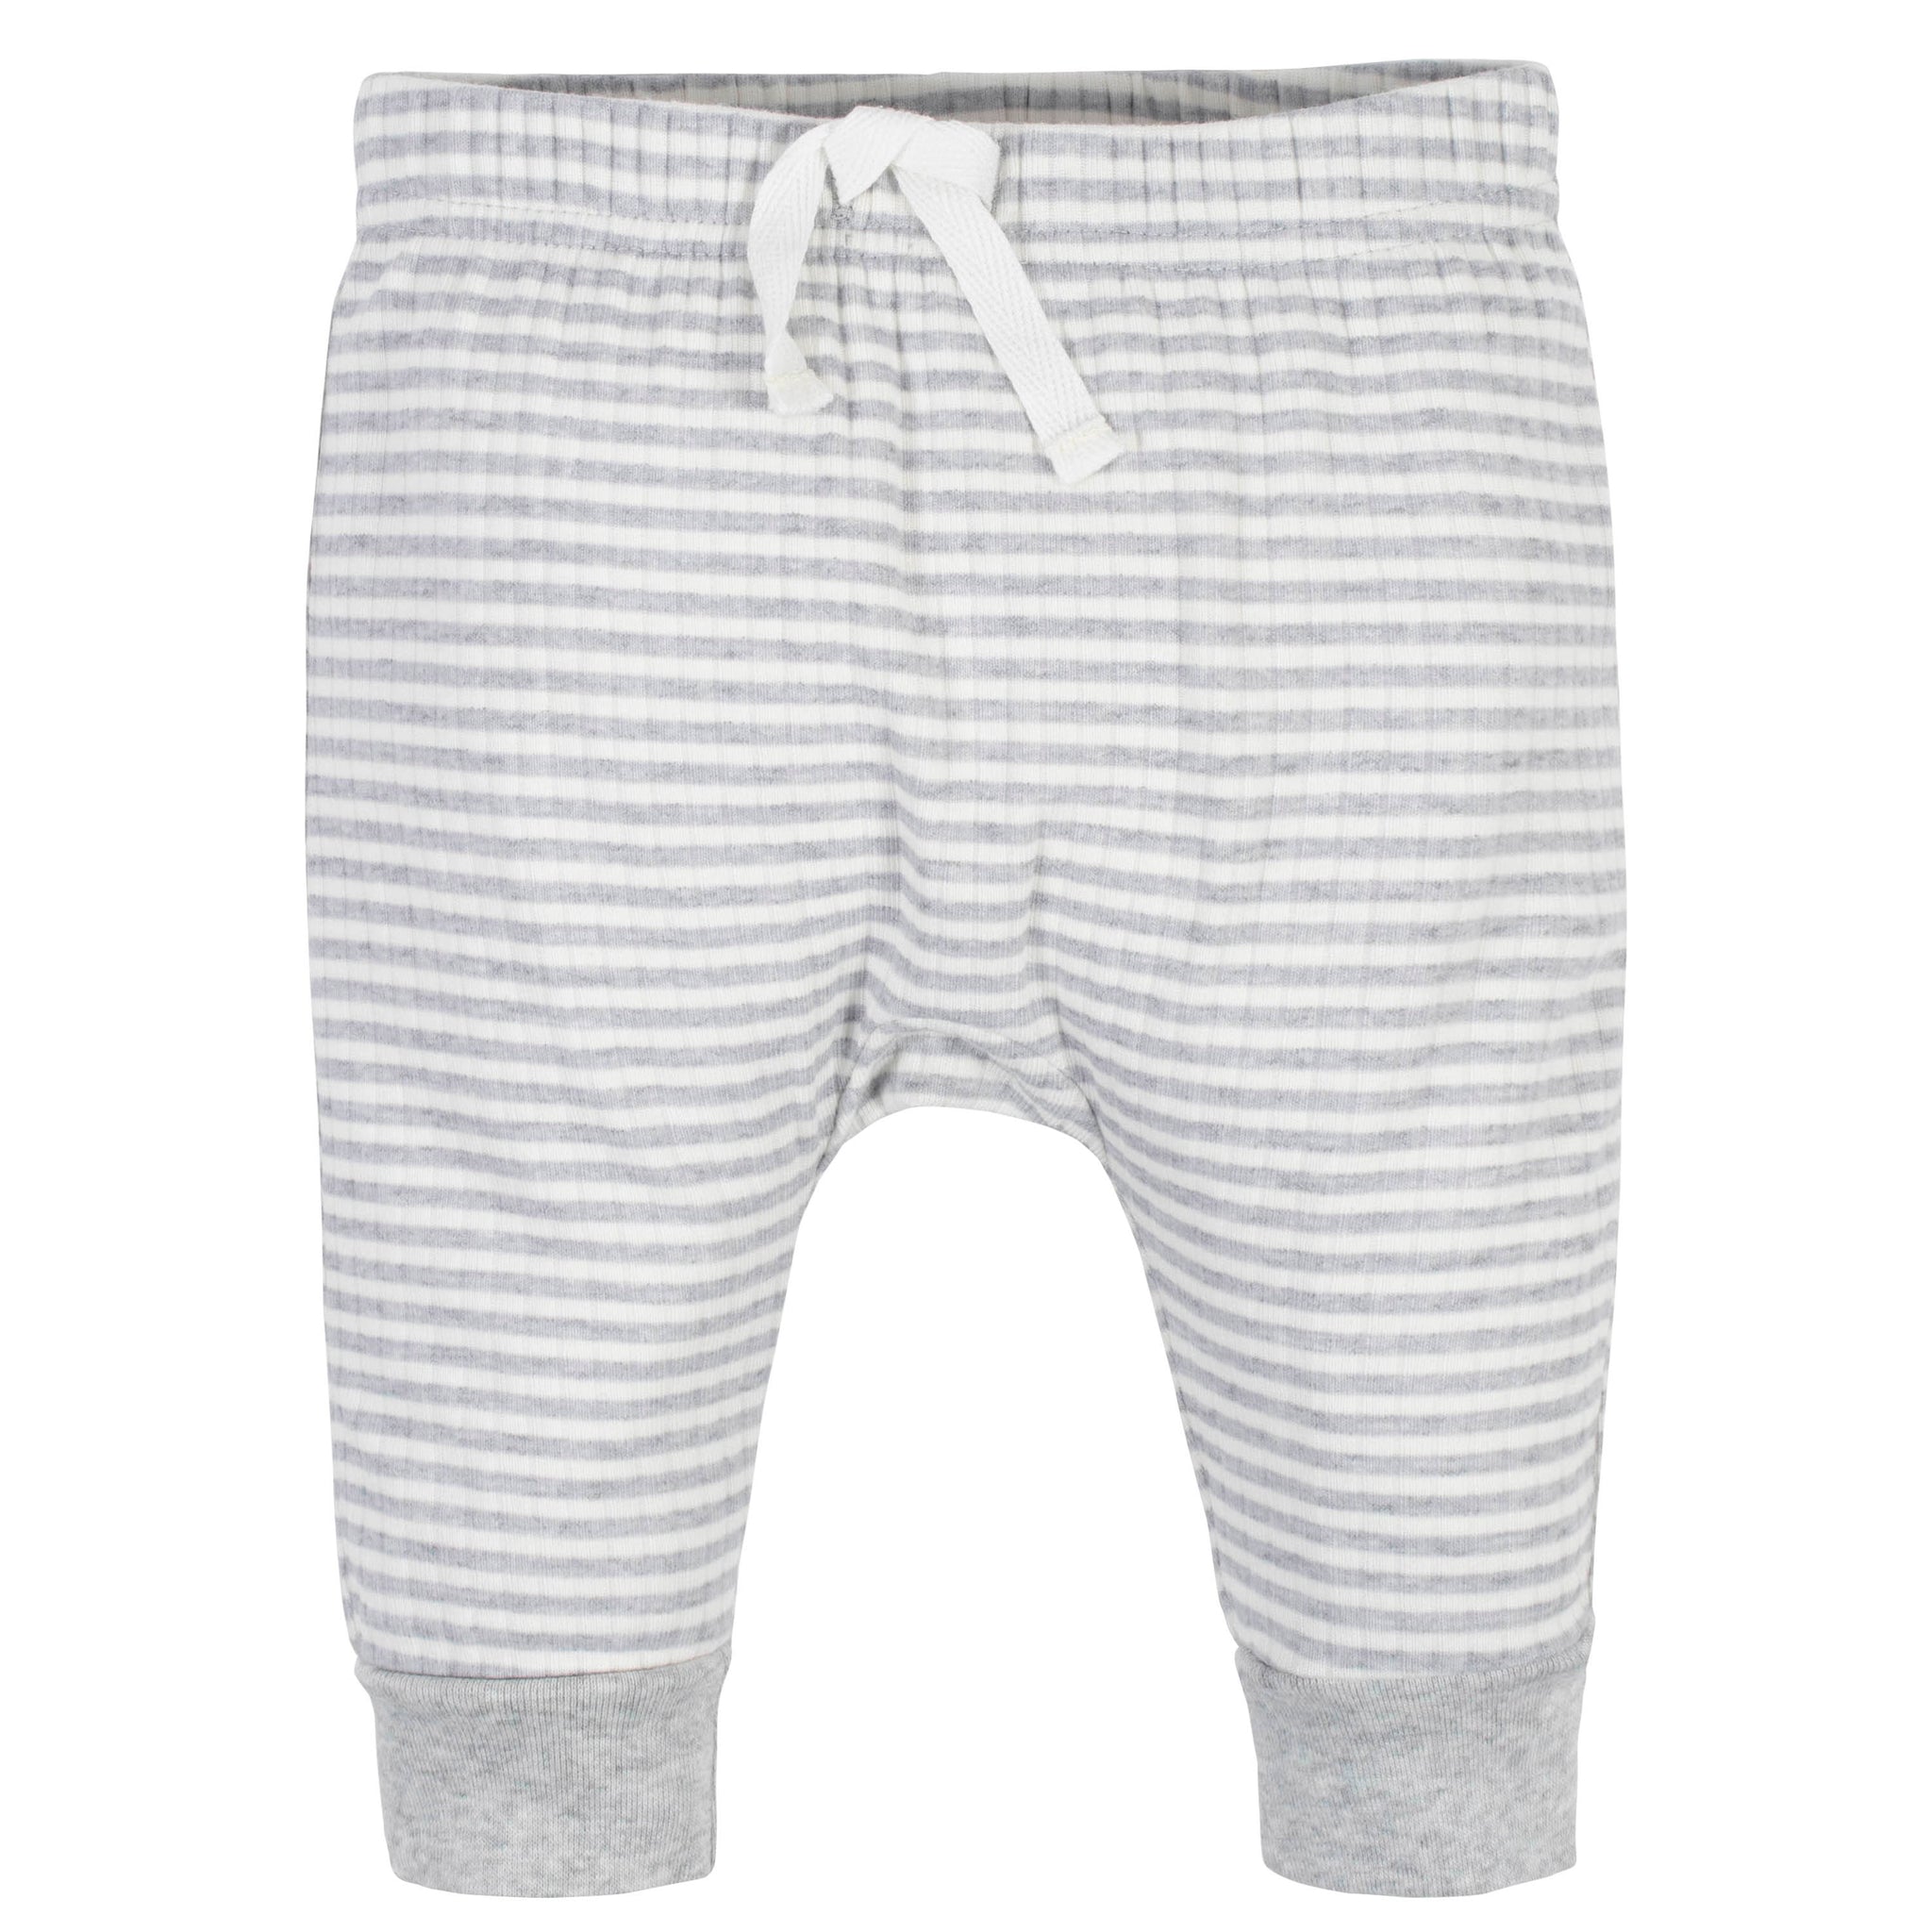 Assorted Organic Baby Neutral Wildflower & Gray Pants-Gerber Childrenswear Wholesale